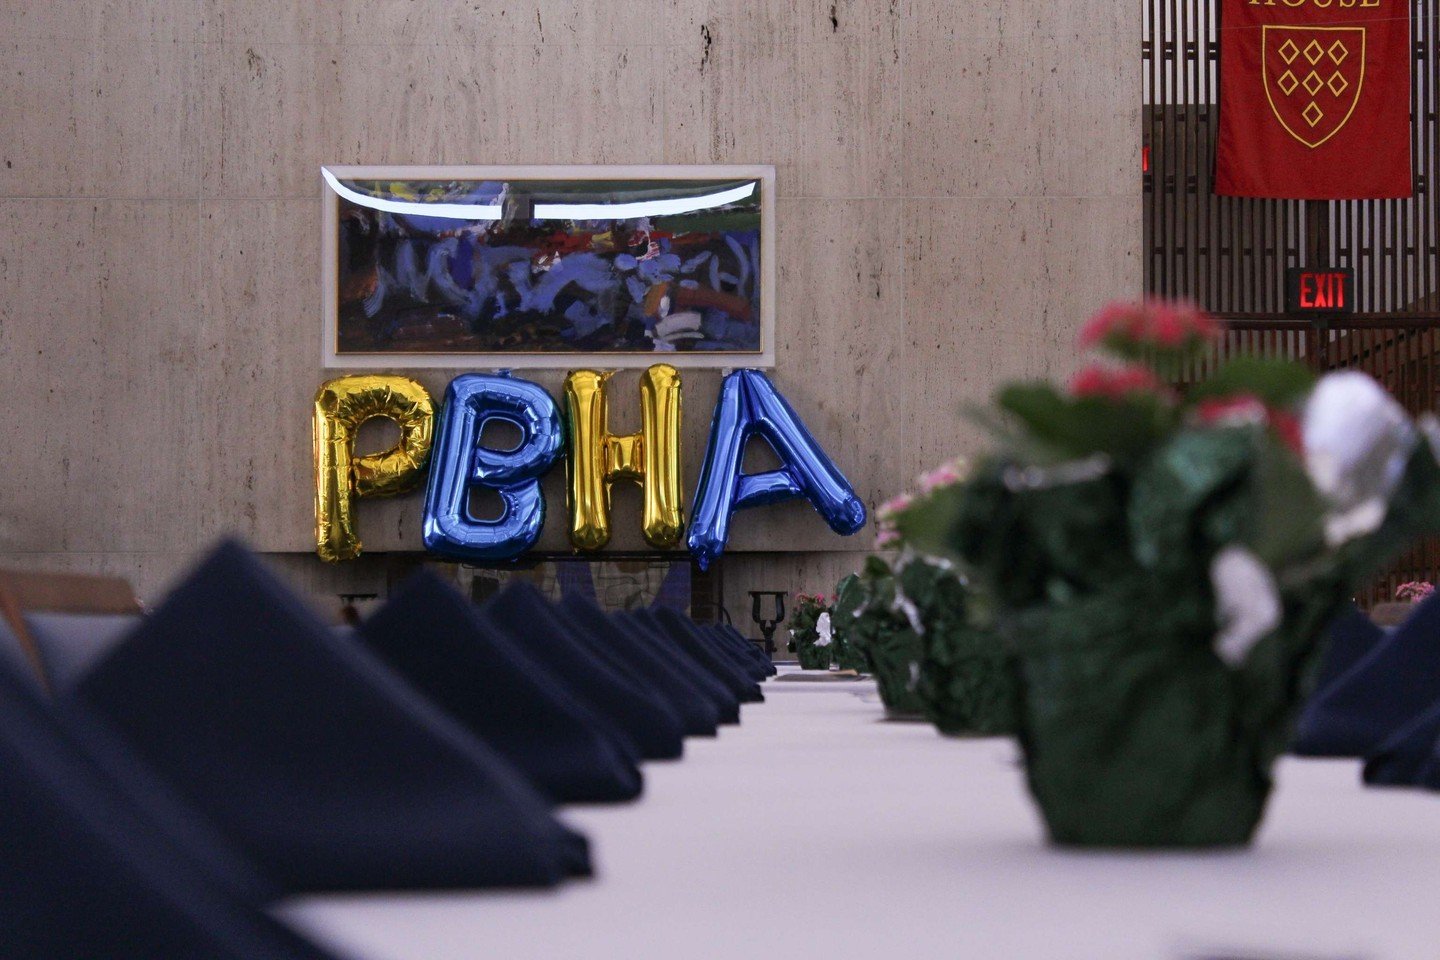 Today is our annual Public Service Celebration! 🎉 Festivities include a Senior Reception dinner, an award ceremony, and, as always, a space for connection. All in Quincy D-Hall, decorated to the nines. 😎

We are so excited to celebrate the amazing 